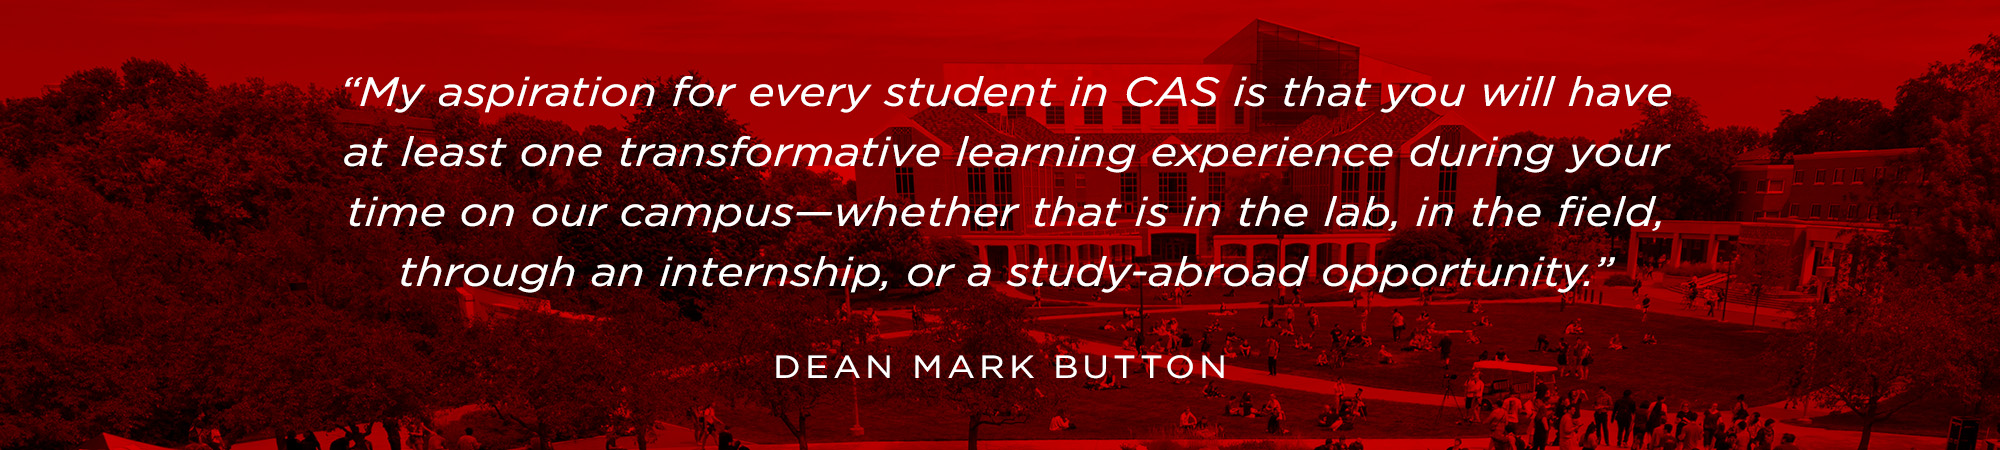 Dean Mark Button quote about experiential learning